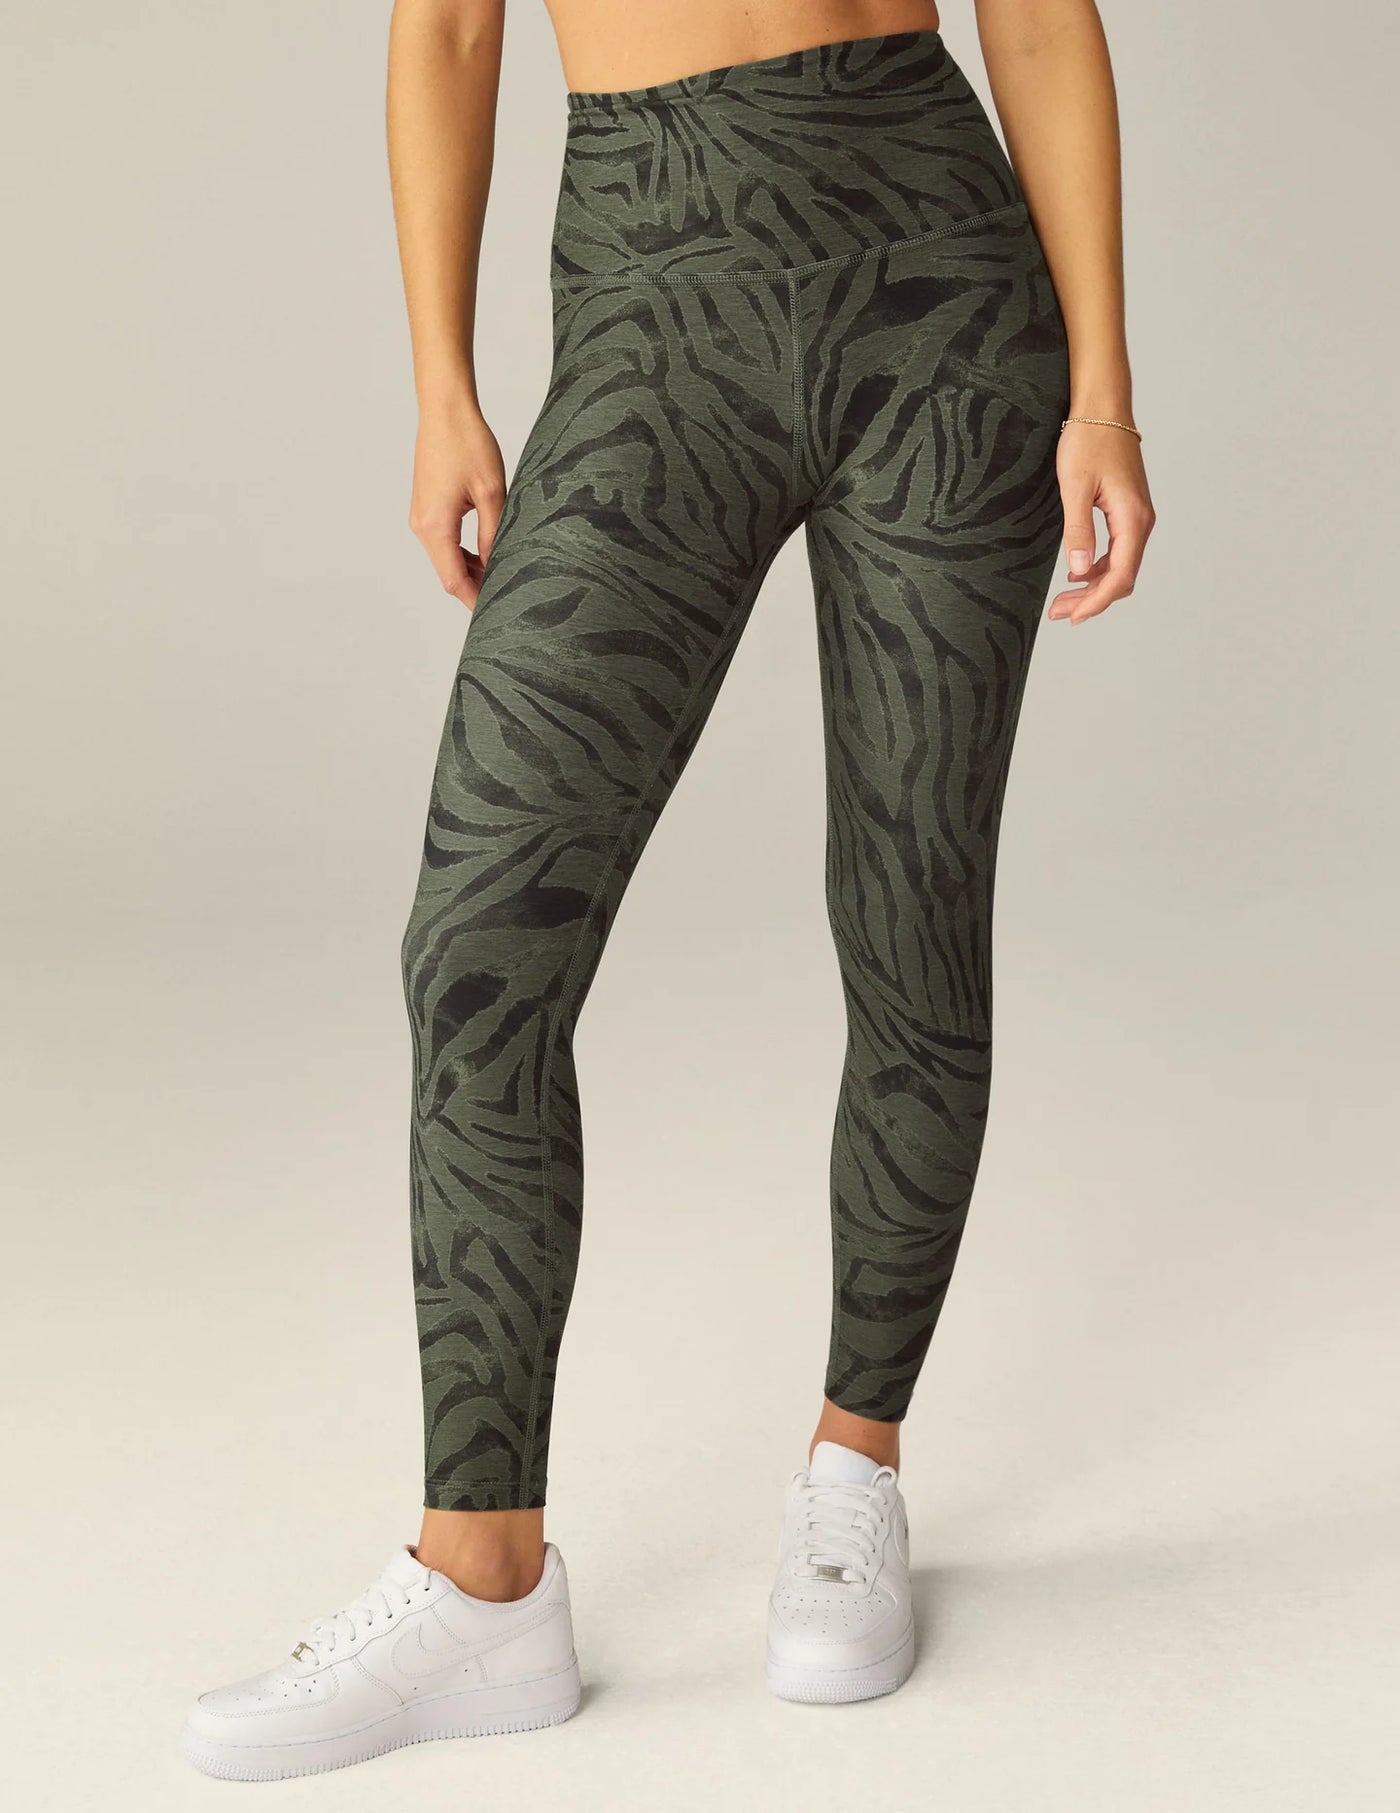 PowerHold by Fabletics Charcoal Camo Mid Rise Printed Legging WomenSize XS.  C26